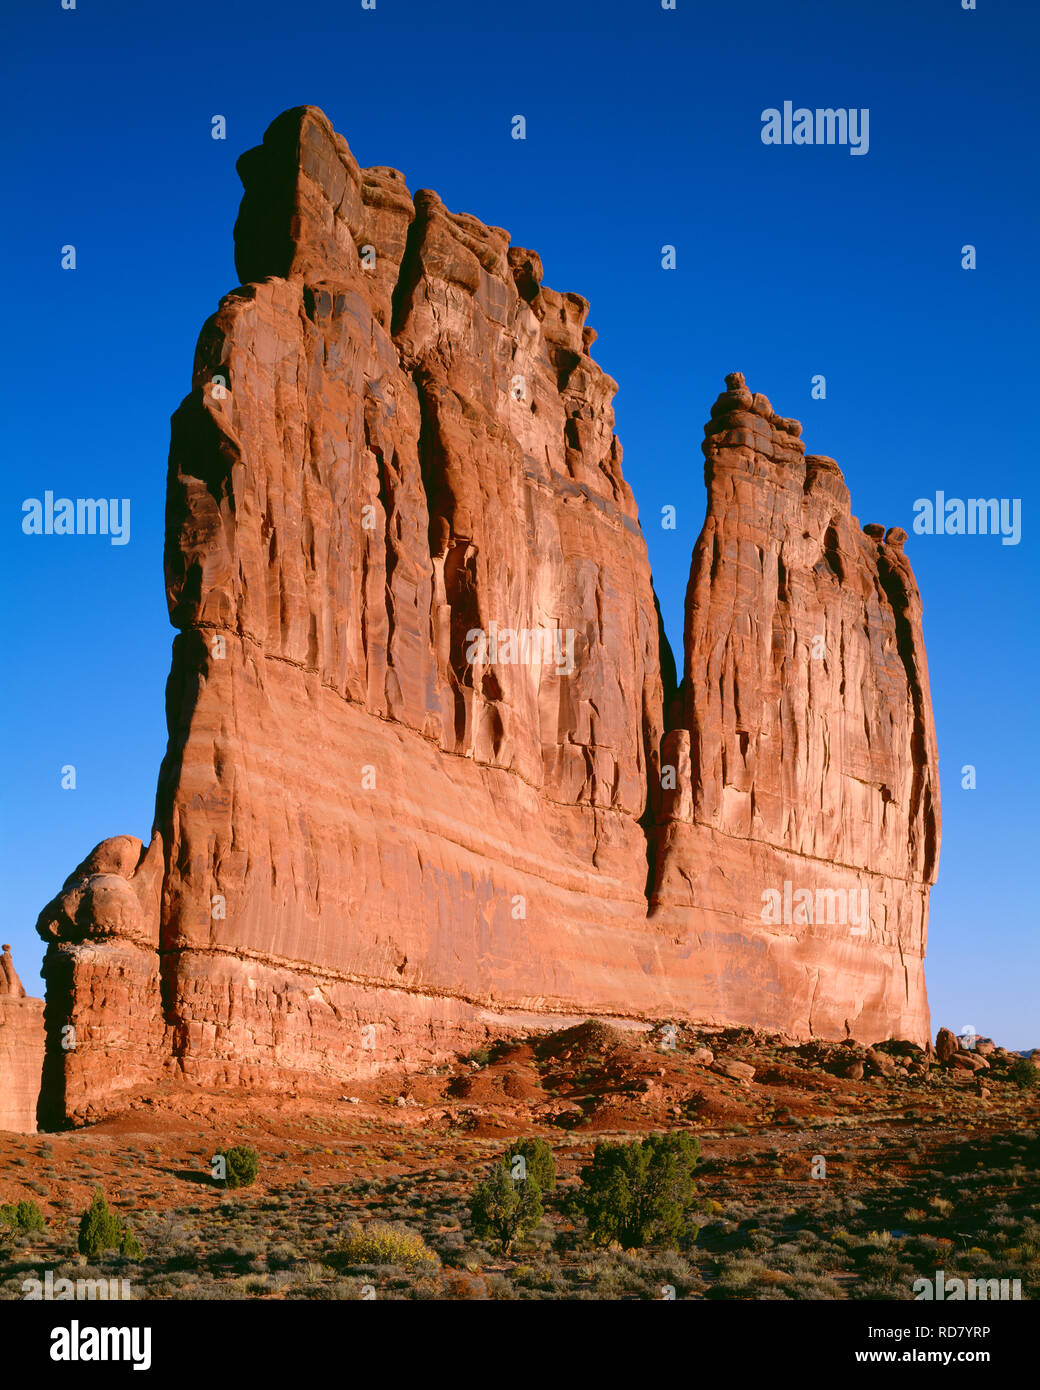 USA, Utah, Arches National Park, Early morning light on The Organ which is a huge fin composed of Entrada Sandstone. Stock Photo